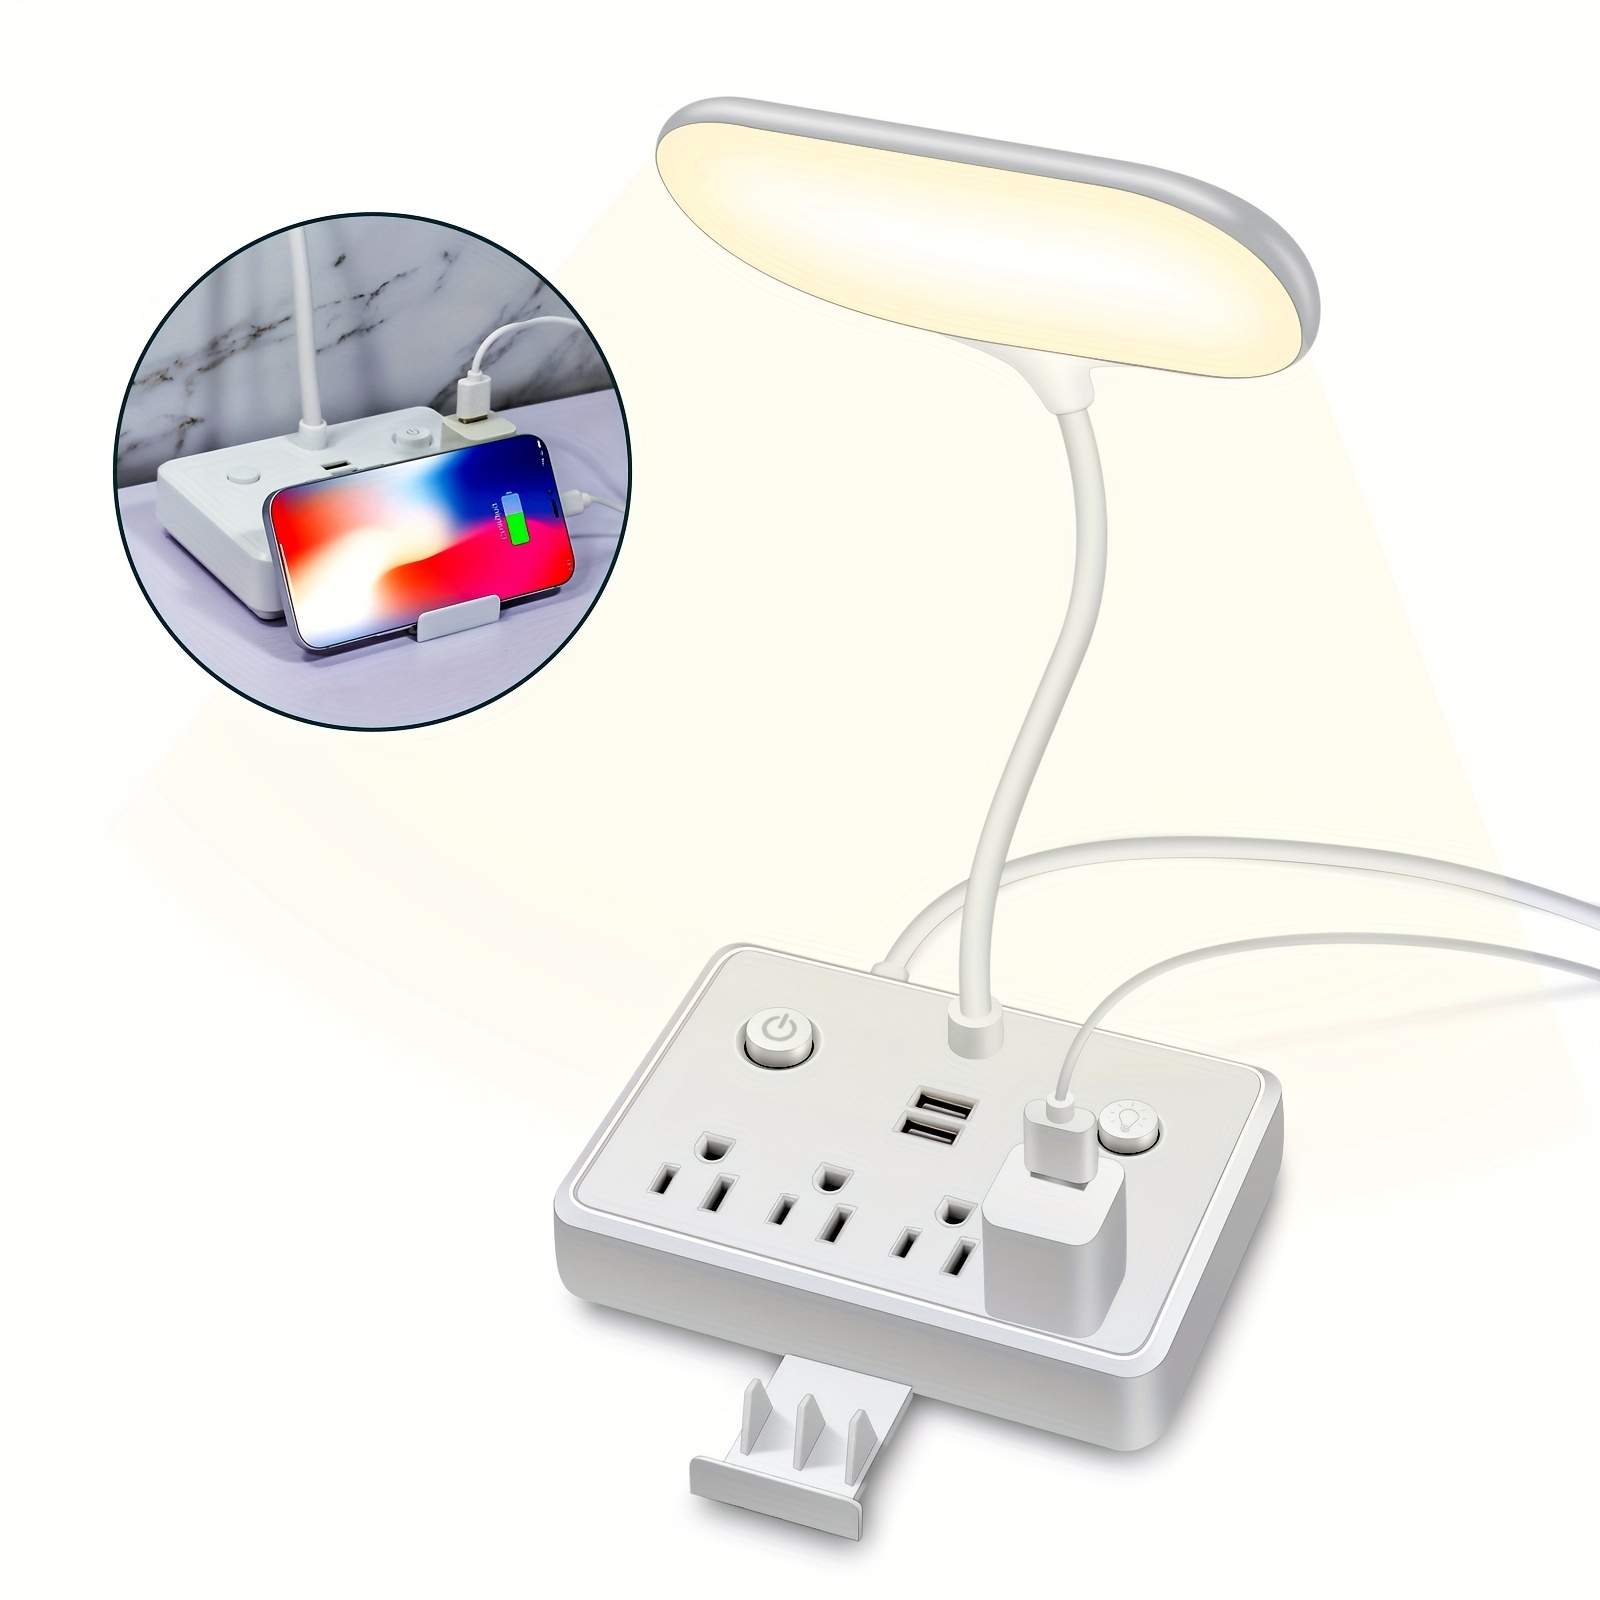 Can the USB Desk Lamp Be Used While Charging? Can It Be Directly Plugged  into the Power Supply?